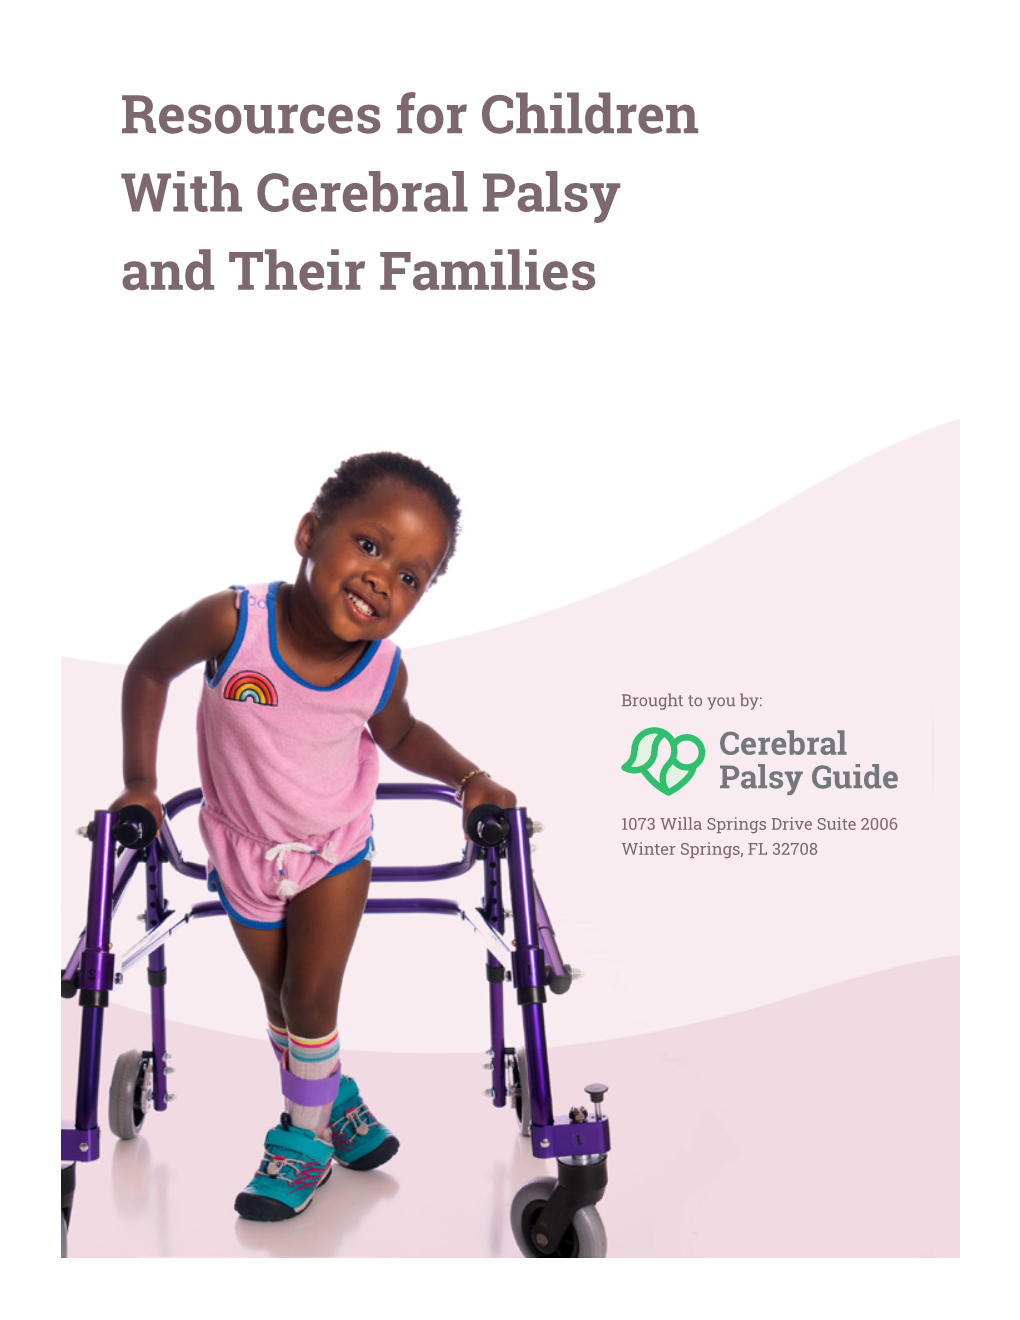 Resources for Children with Cerebral Palsy and Their Families